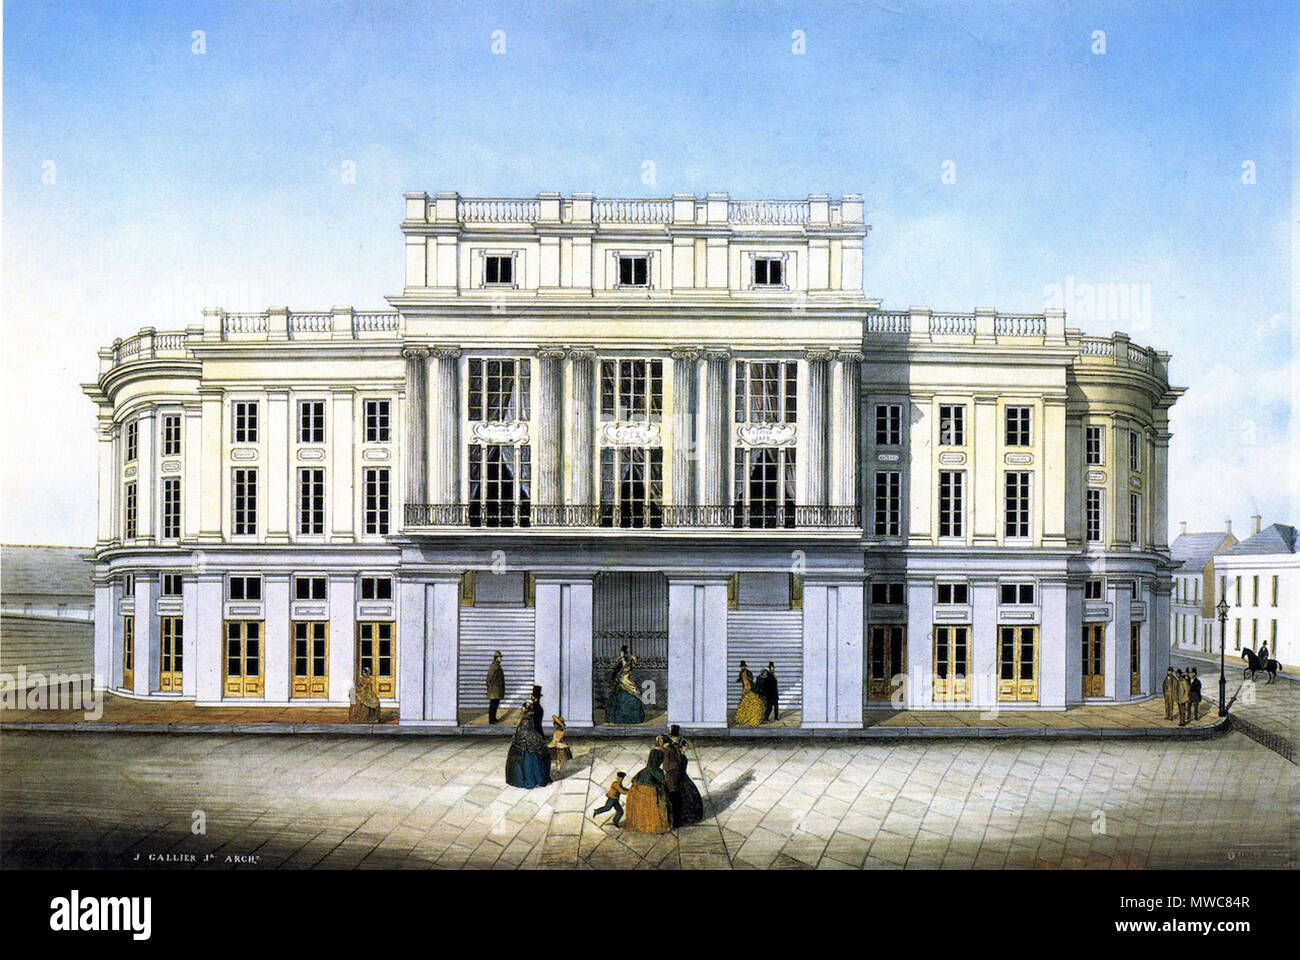 . New Orleans: French Opera House. 19th century view by painter Marie Adrien Persac (1823-1873). Height: 40.32 cm (15.88 in.), Width: 59.69 cm (23.5 in.) This is a view of the building's front on Bourbon Street. Due to the restrictions of trying to photograph the building fronting a somewhat narrow street, it is more commonly seen from the side or views from the next corner. 1859. Marie Adrien Persac (1823-1873) 221 FrenchOperaHouseFrontPersac Stock Photo